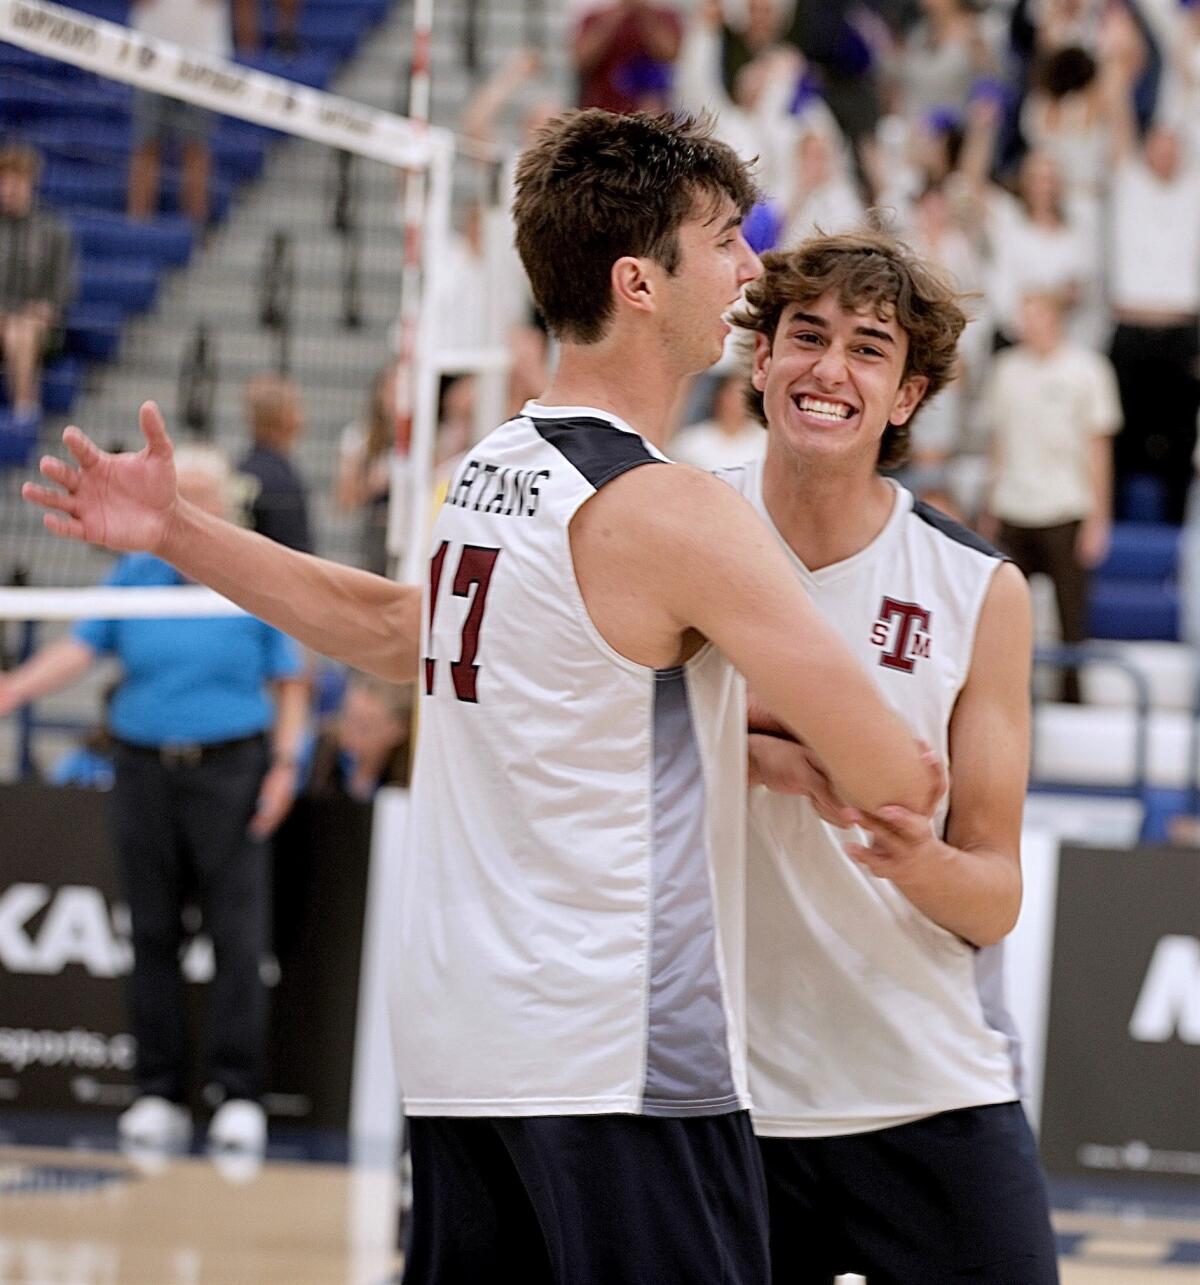 Reed Wainright (left) is congratulated by Miles Eaton after St. Margaret's beat San Clemente.